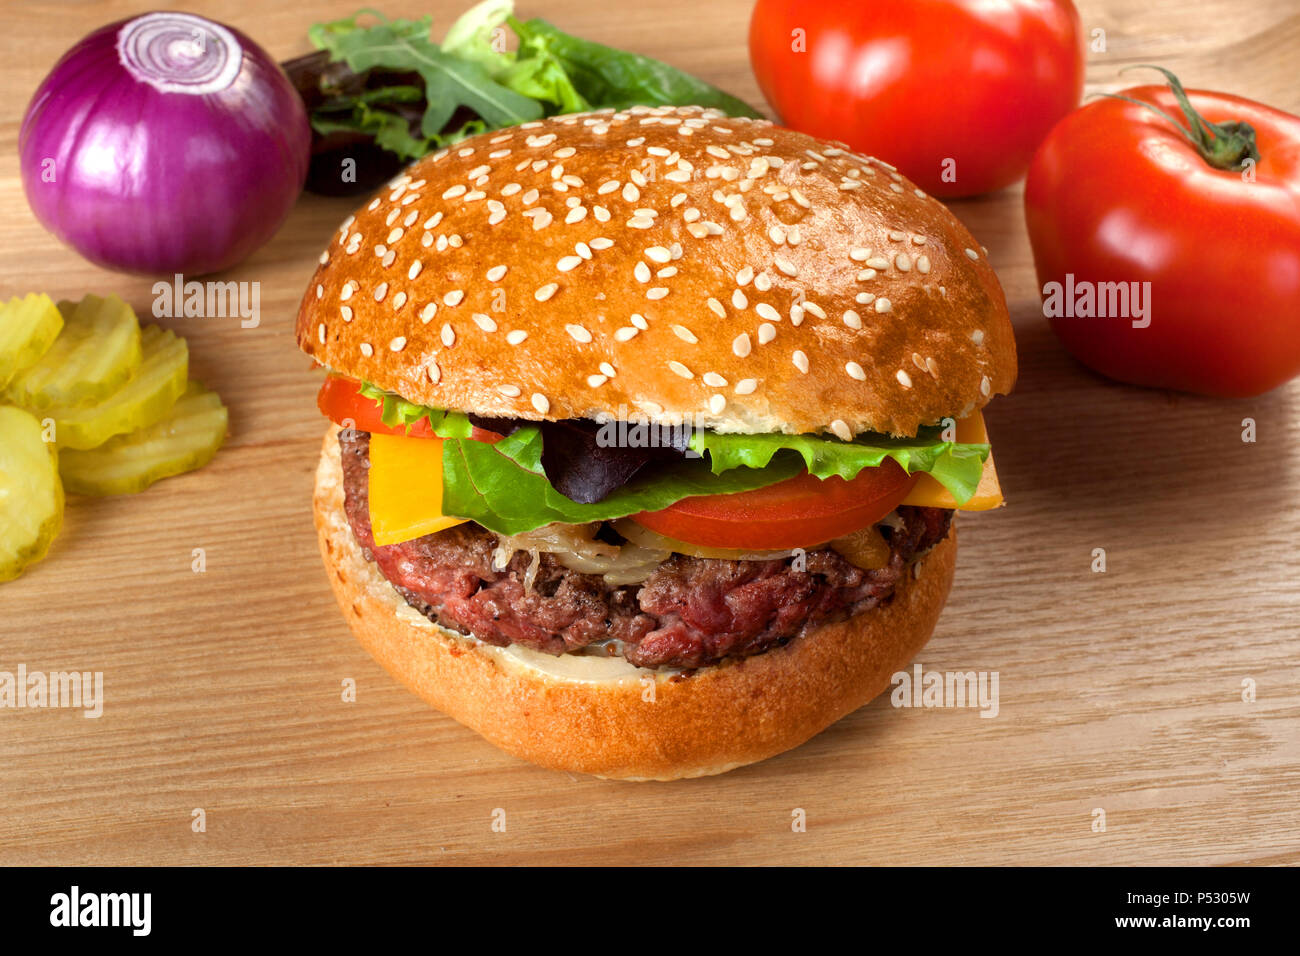 homemade hamburger with beef on a wooden table. Stock Photo